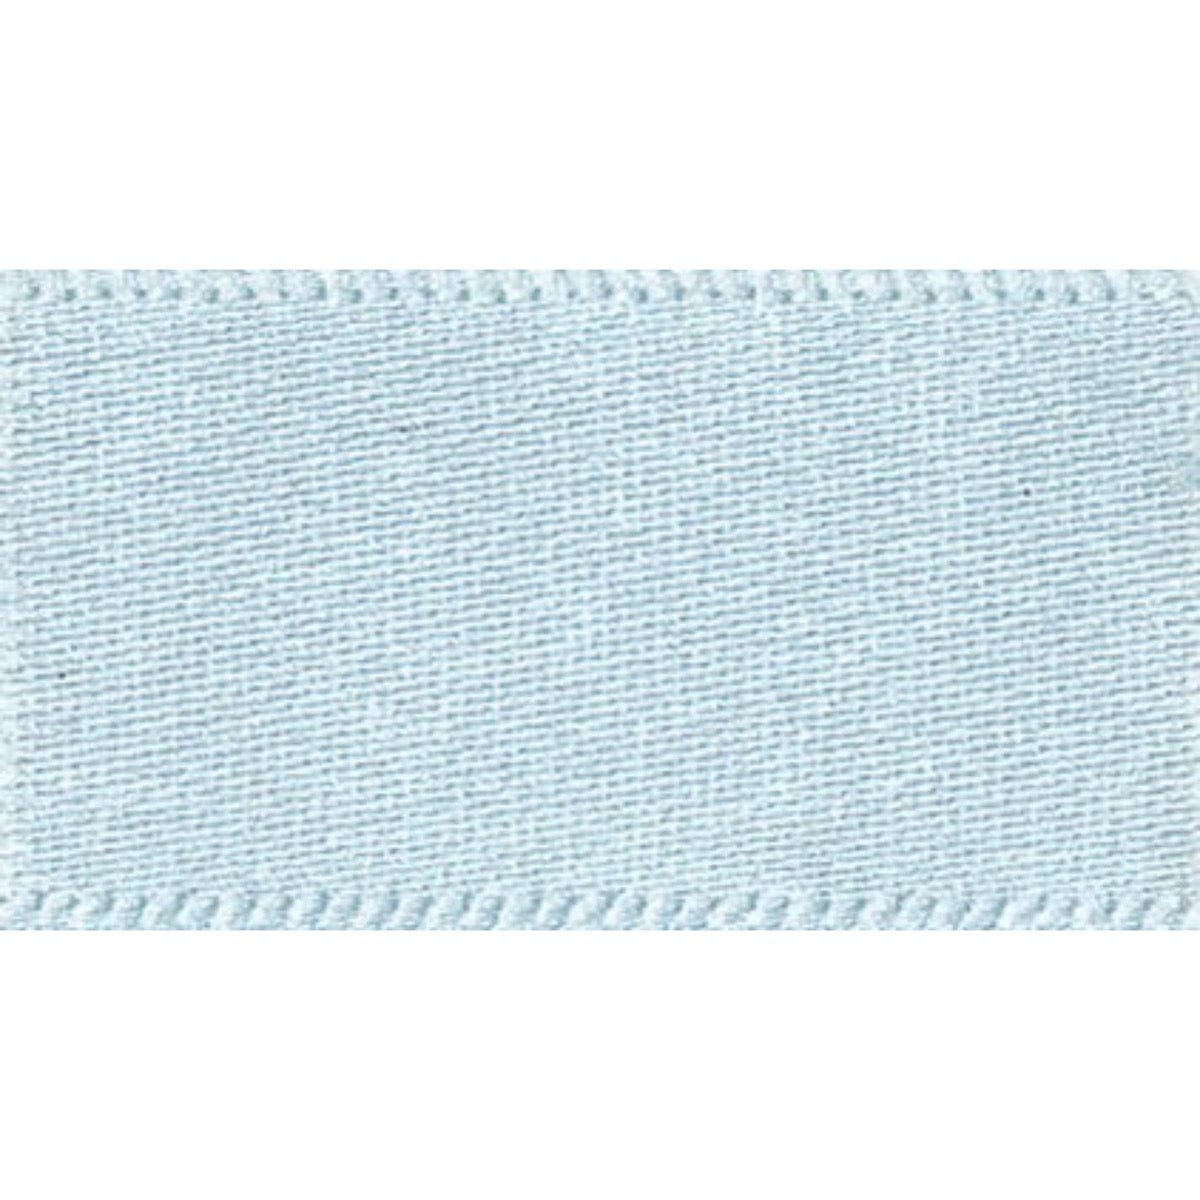 Double Faced Satin Ribbon Sky Blue: 15mm wide. Price per metre.